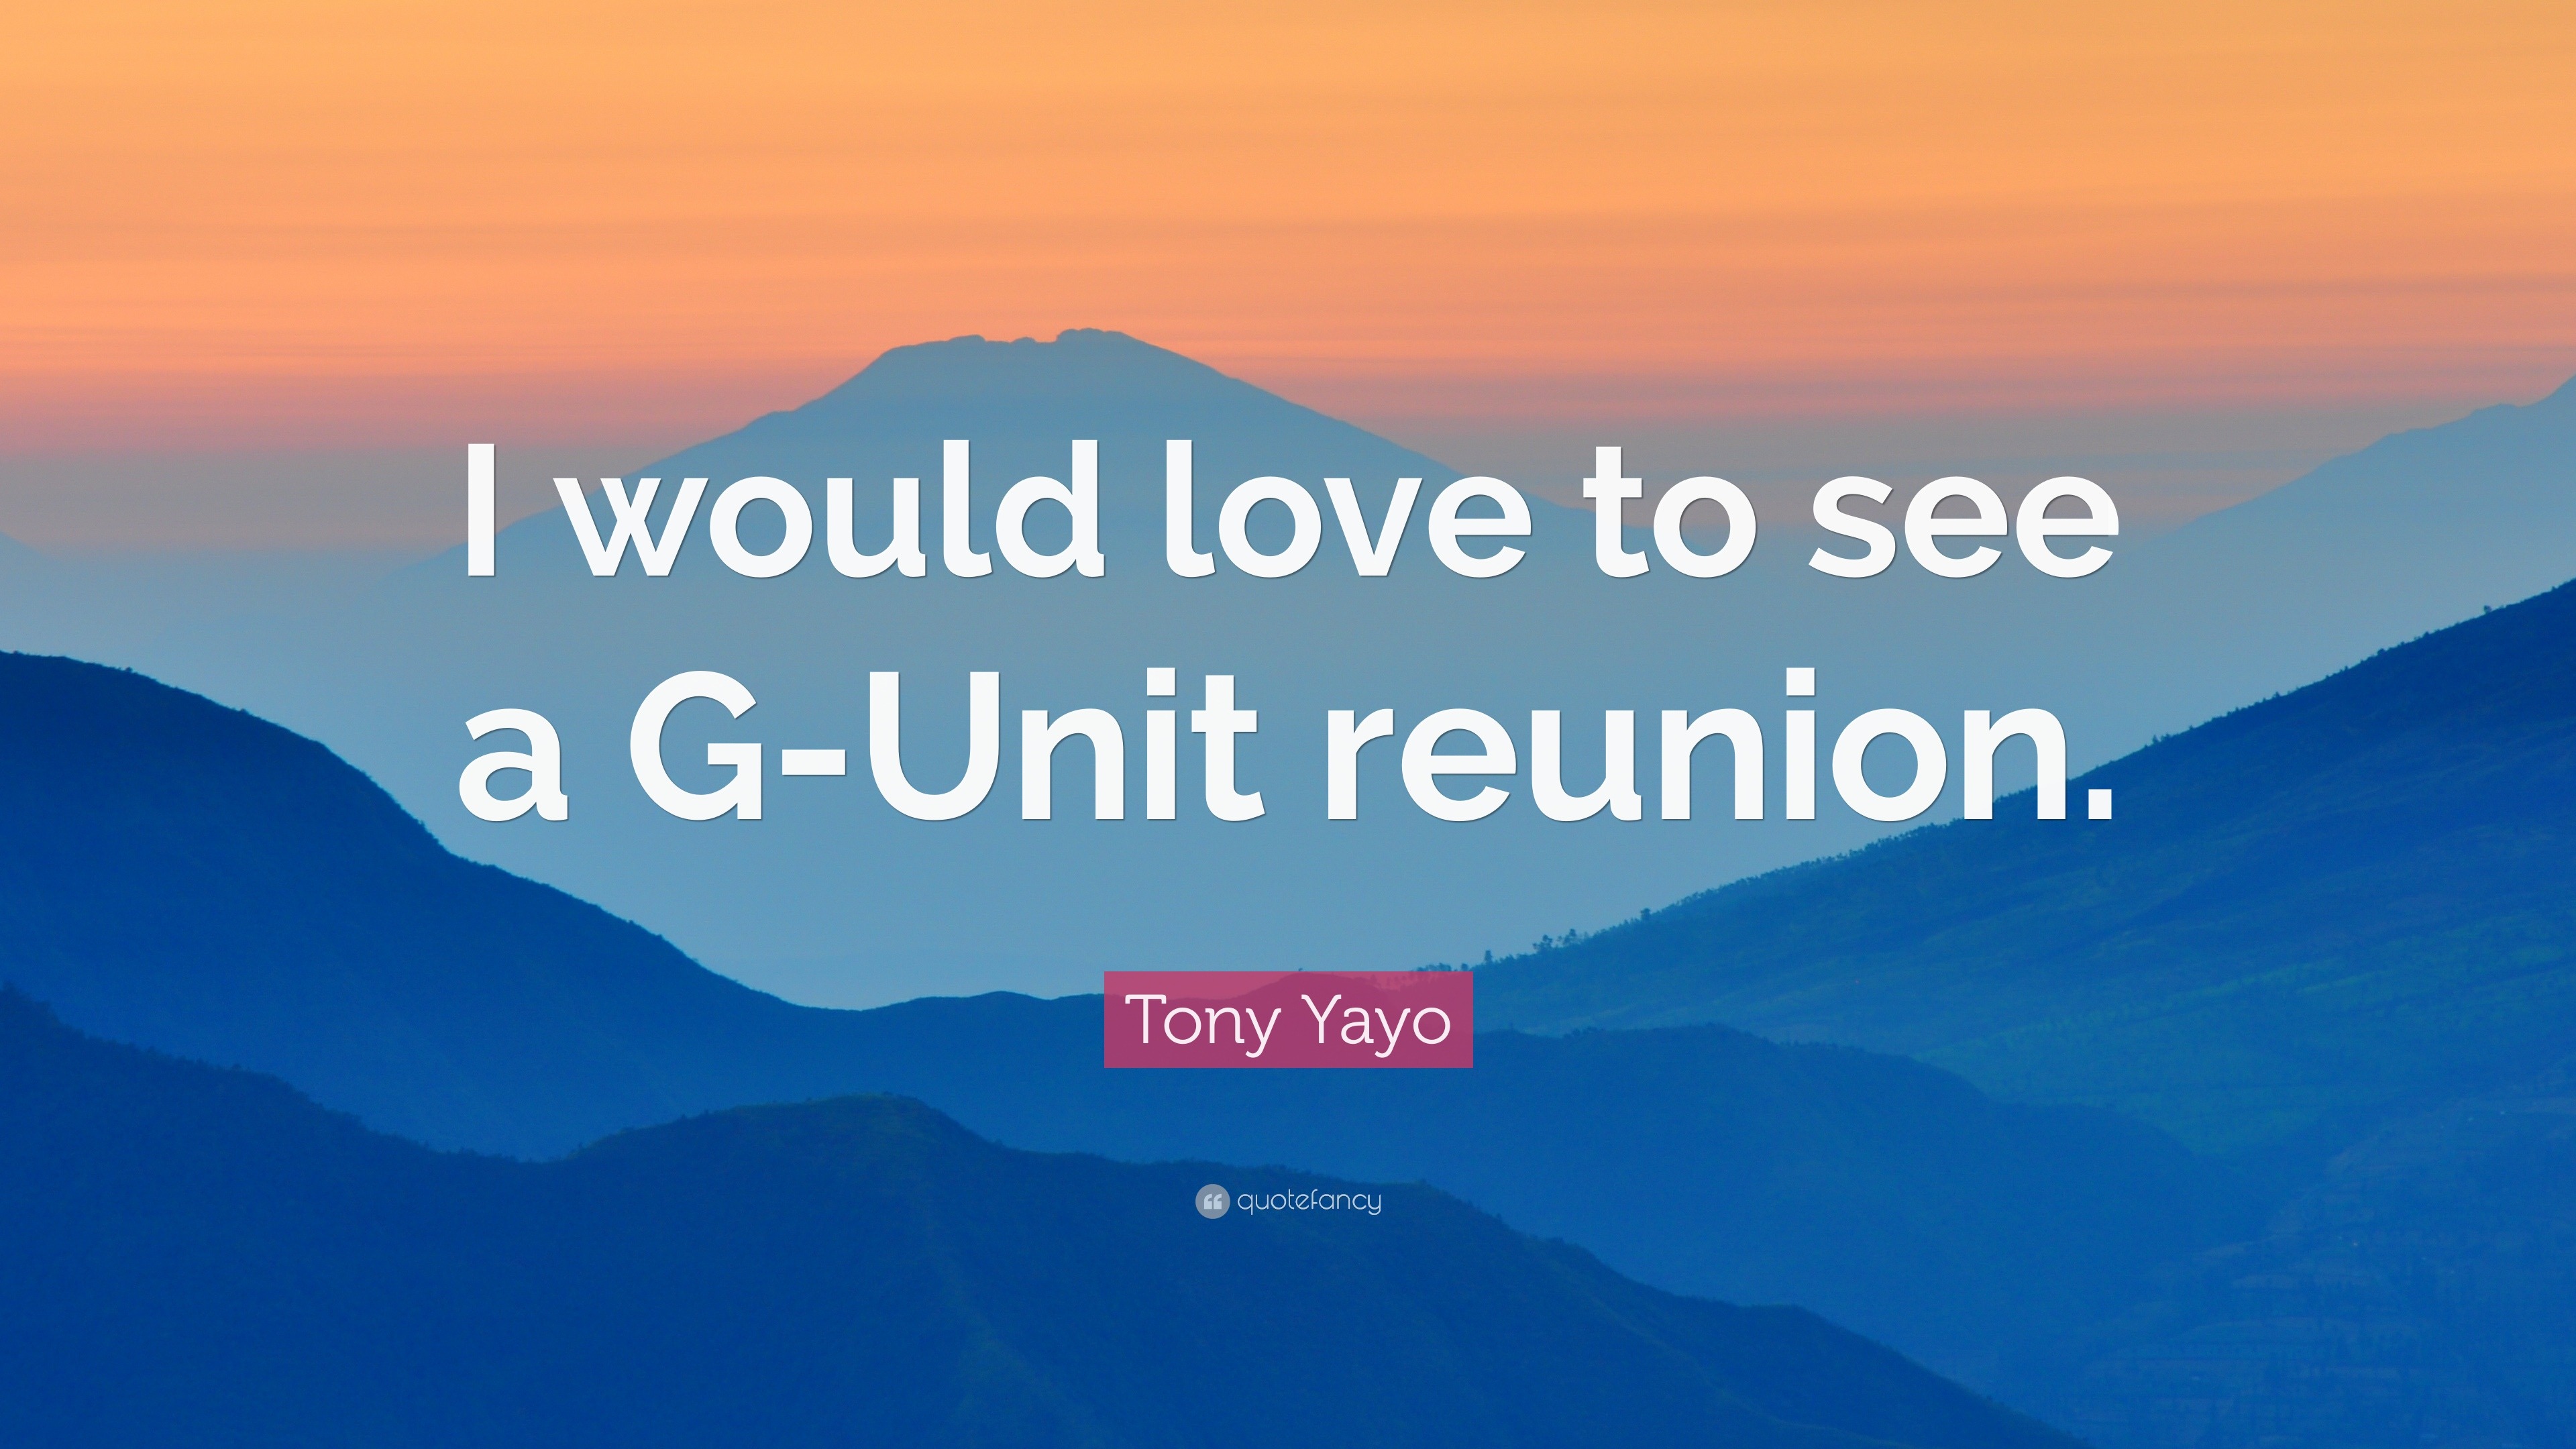 Tony Yayo Quote “I would love to see a GUnit reunion.”